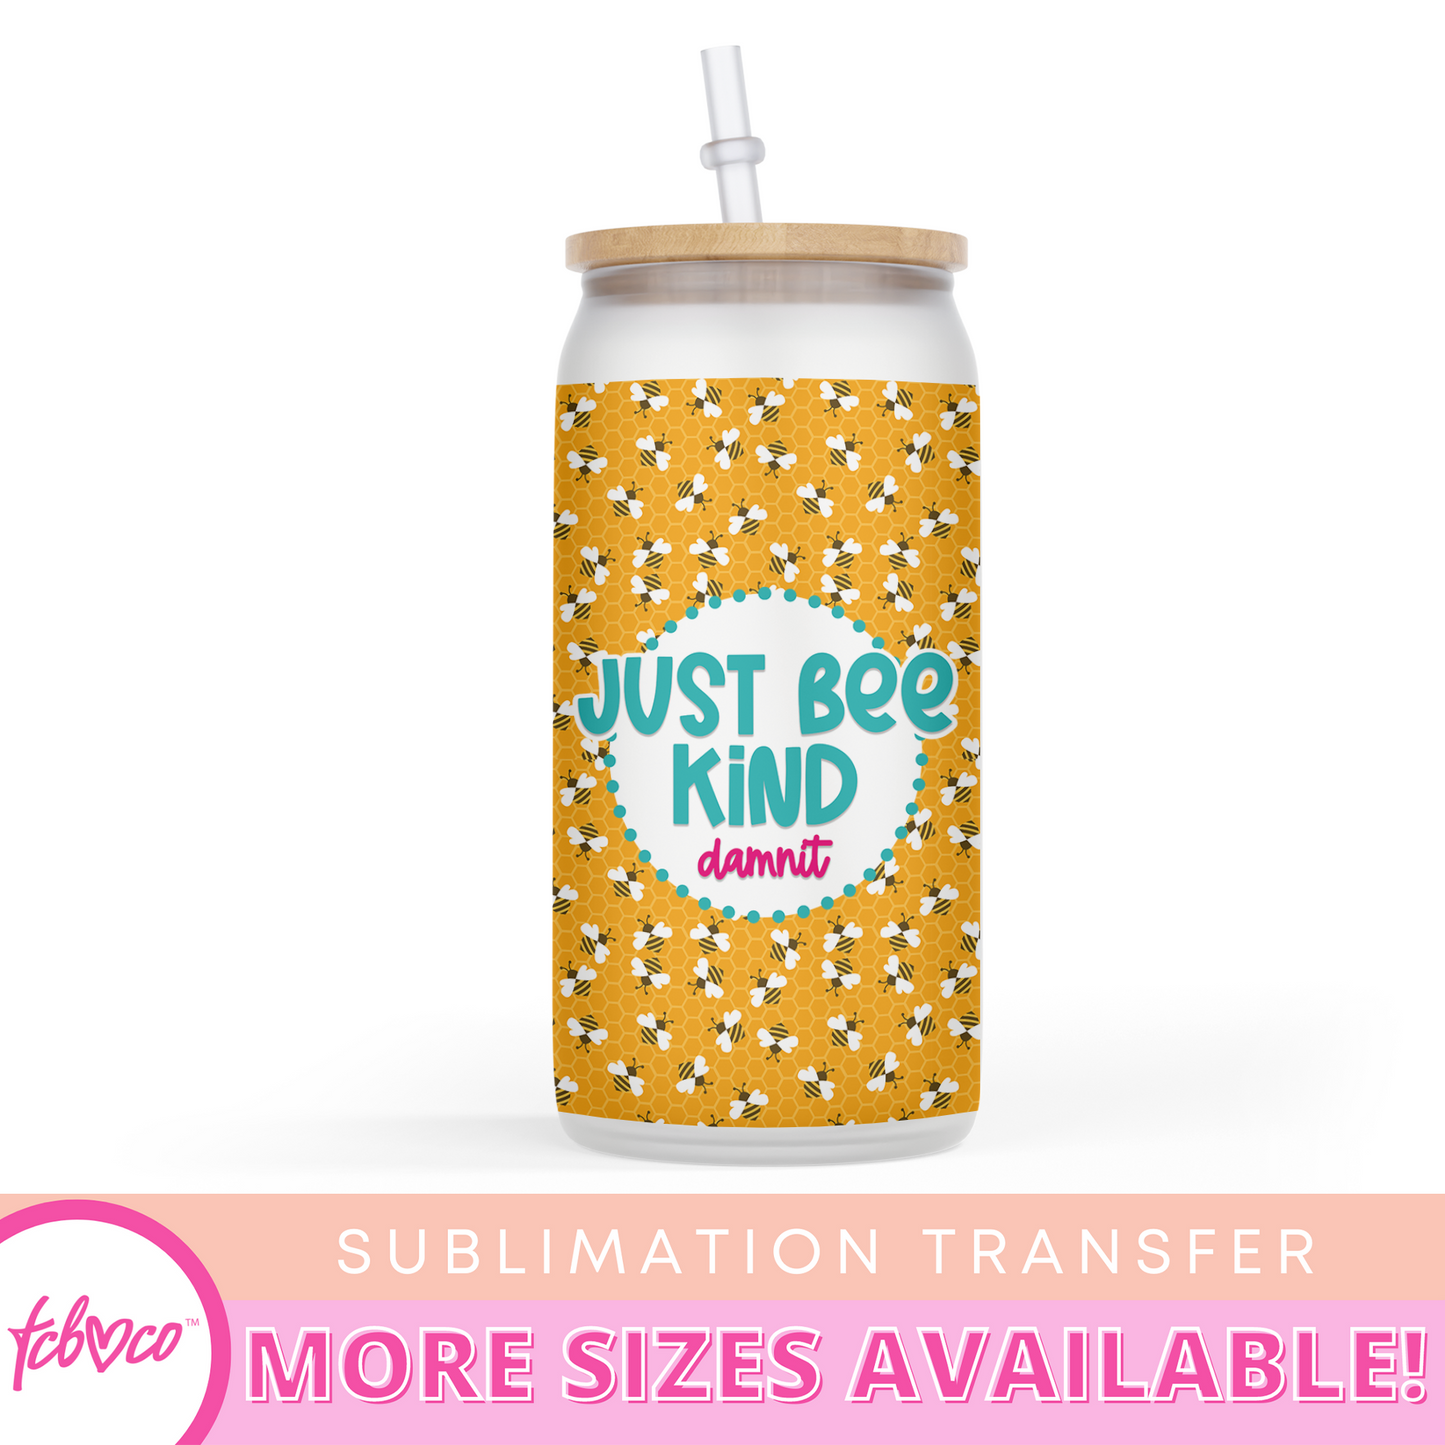 Just Bee Kind Damnit Mousepad Sublimation Transfer